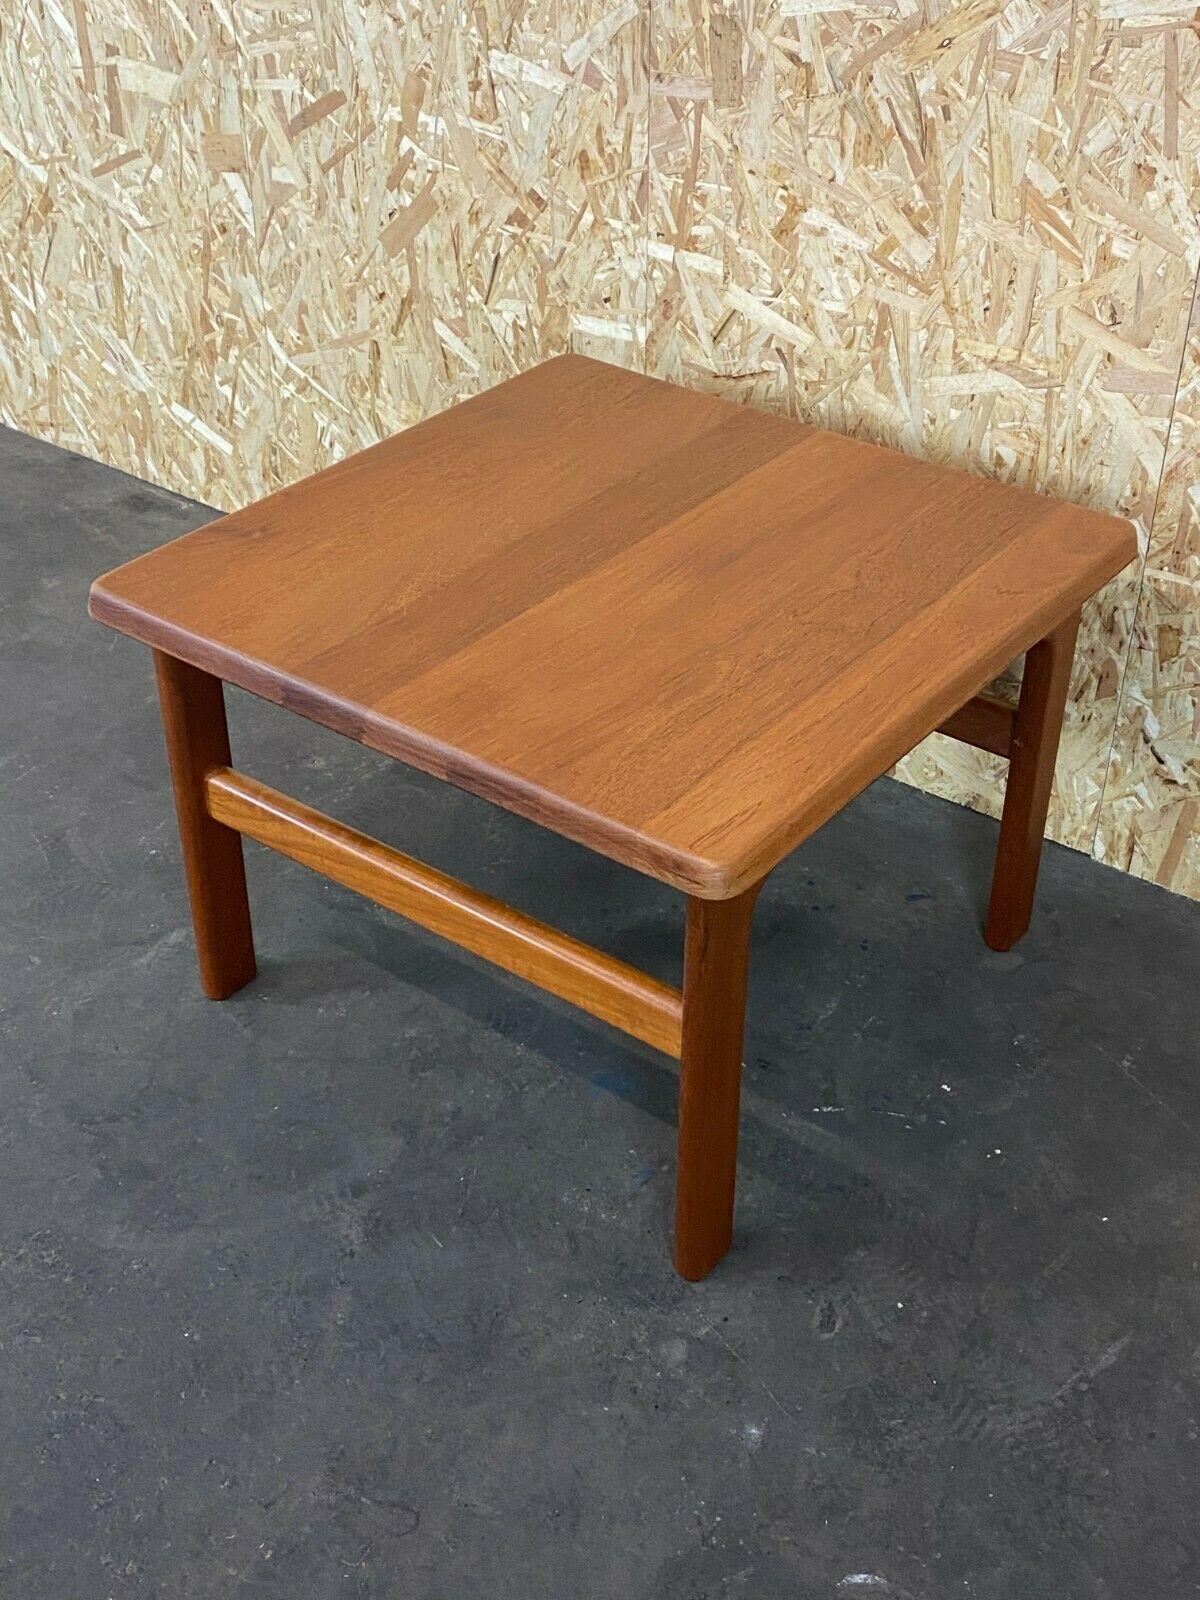 60s 70s teak table side table coffee table Niels Bach Design Denmark

Object: table

Manufacturer: Niels Bach

Condition: good

Age: around 1960-1970

Dimensions:

69cm x 69cm x 48cm

Other notes:

The pictures serve as part of the